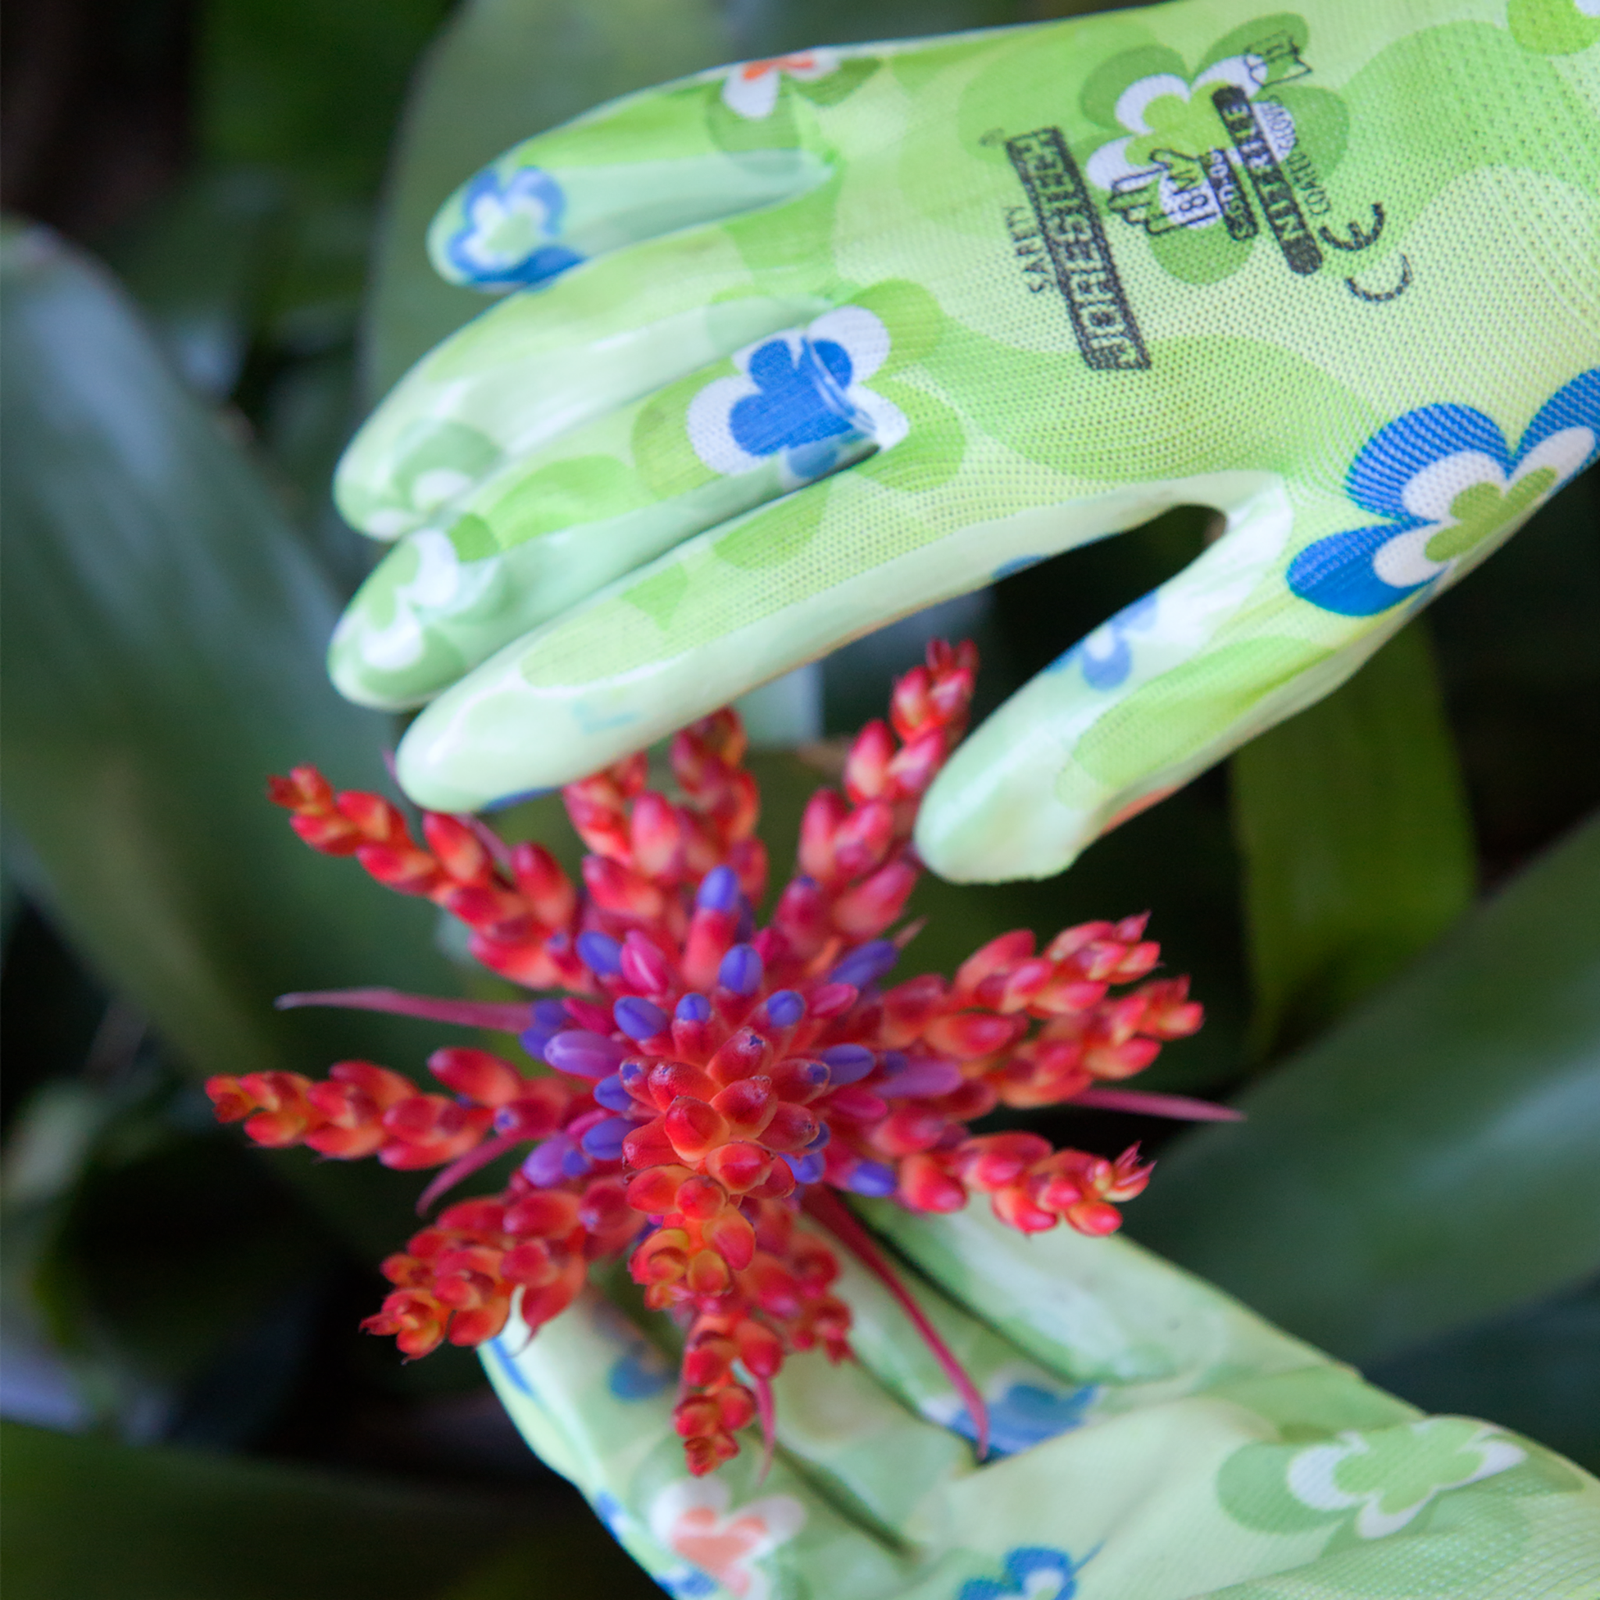 Close up of the JORESTECH safety garden gloves with nitrile dipped palms next to a red bromeliad